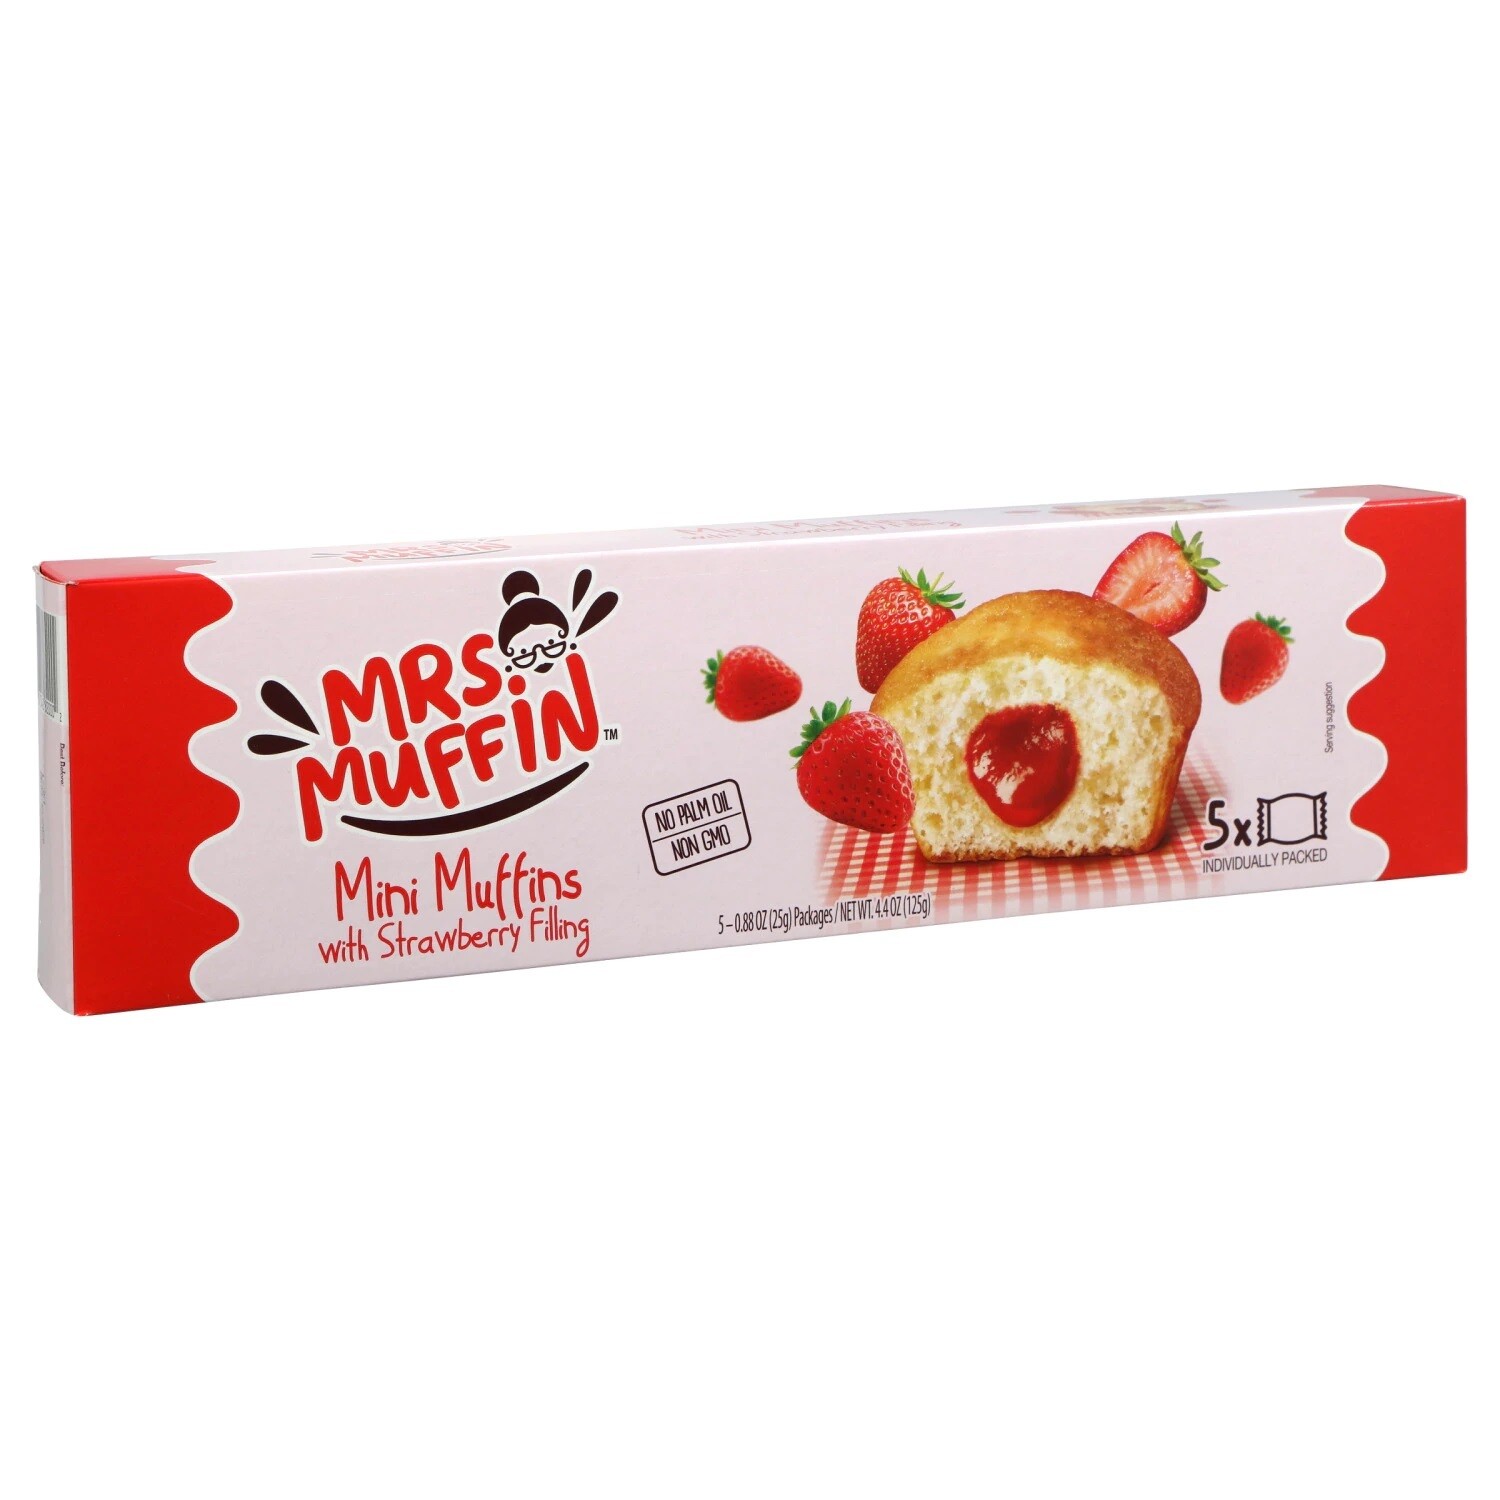 Mrs. Muffin     Mini Muffins with Strawberry Filling 5ct